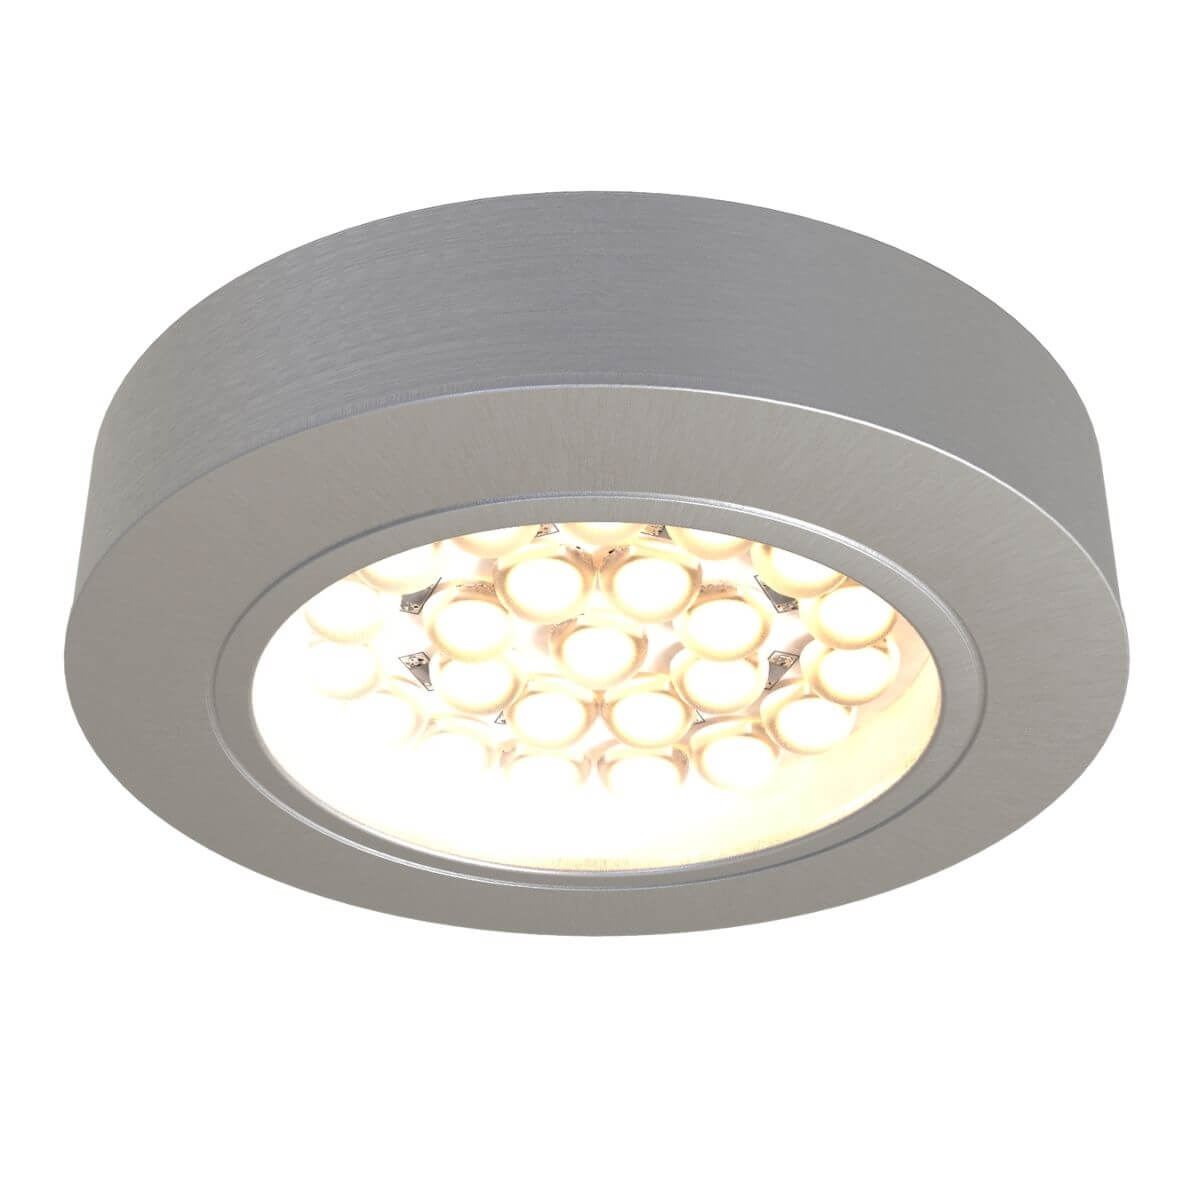 View Surface Mounted 18w Under Cabinet Light LED Supplier information